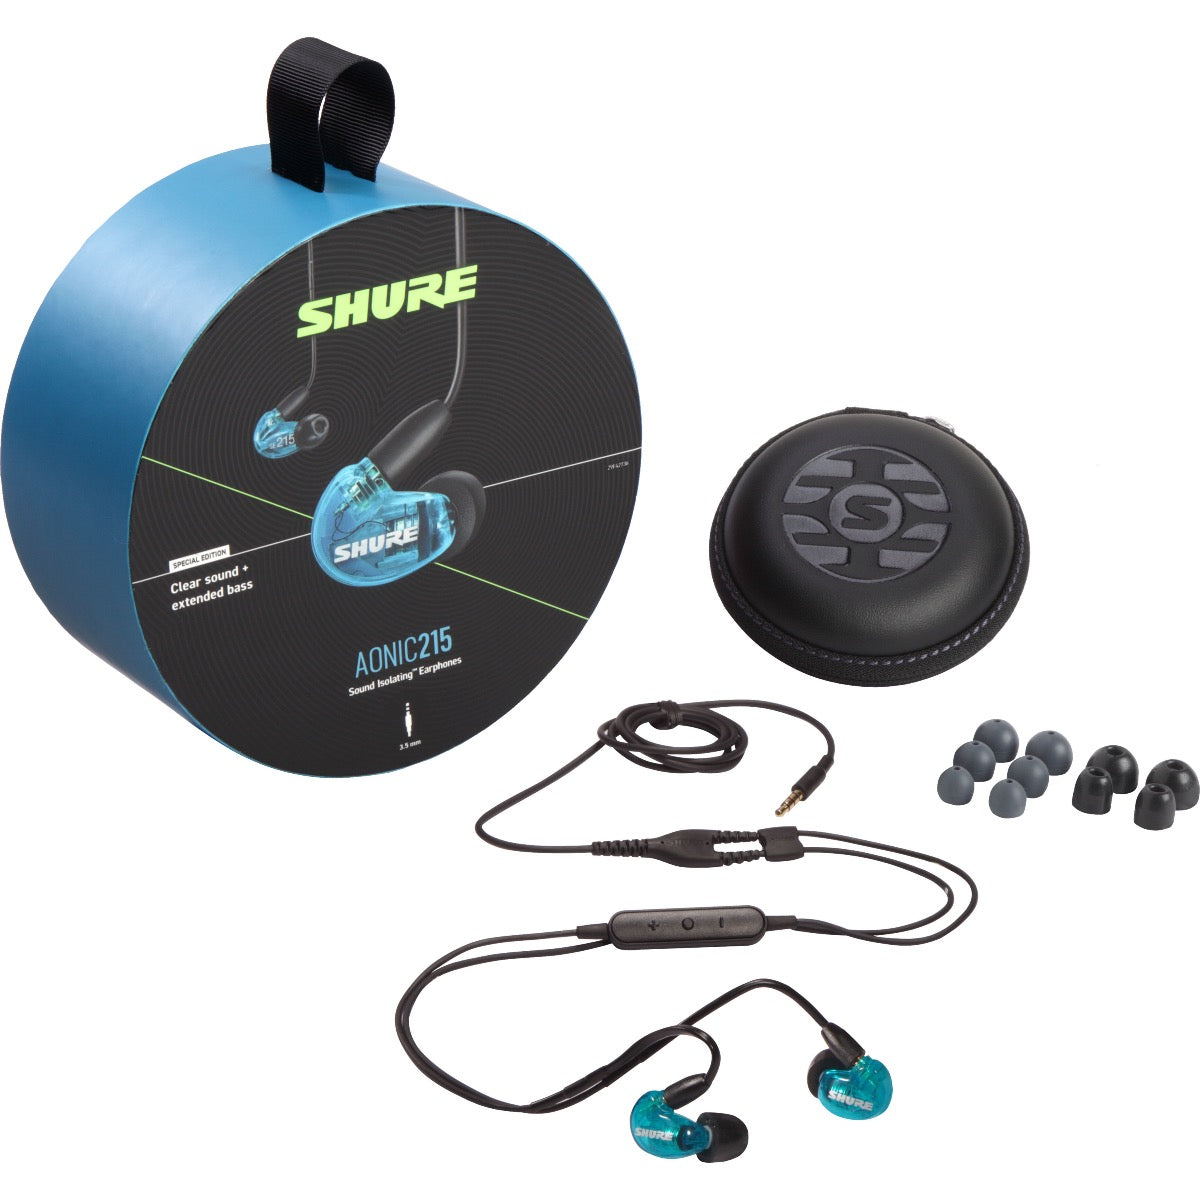 3/4 view of Shure AONIC 215 Sound Isolating Earphones - Blue packaging and components showing top, front and left sides